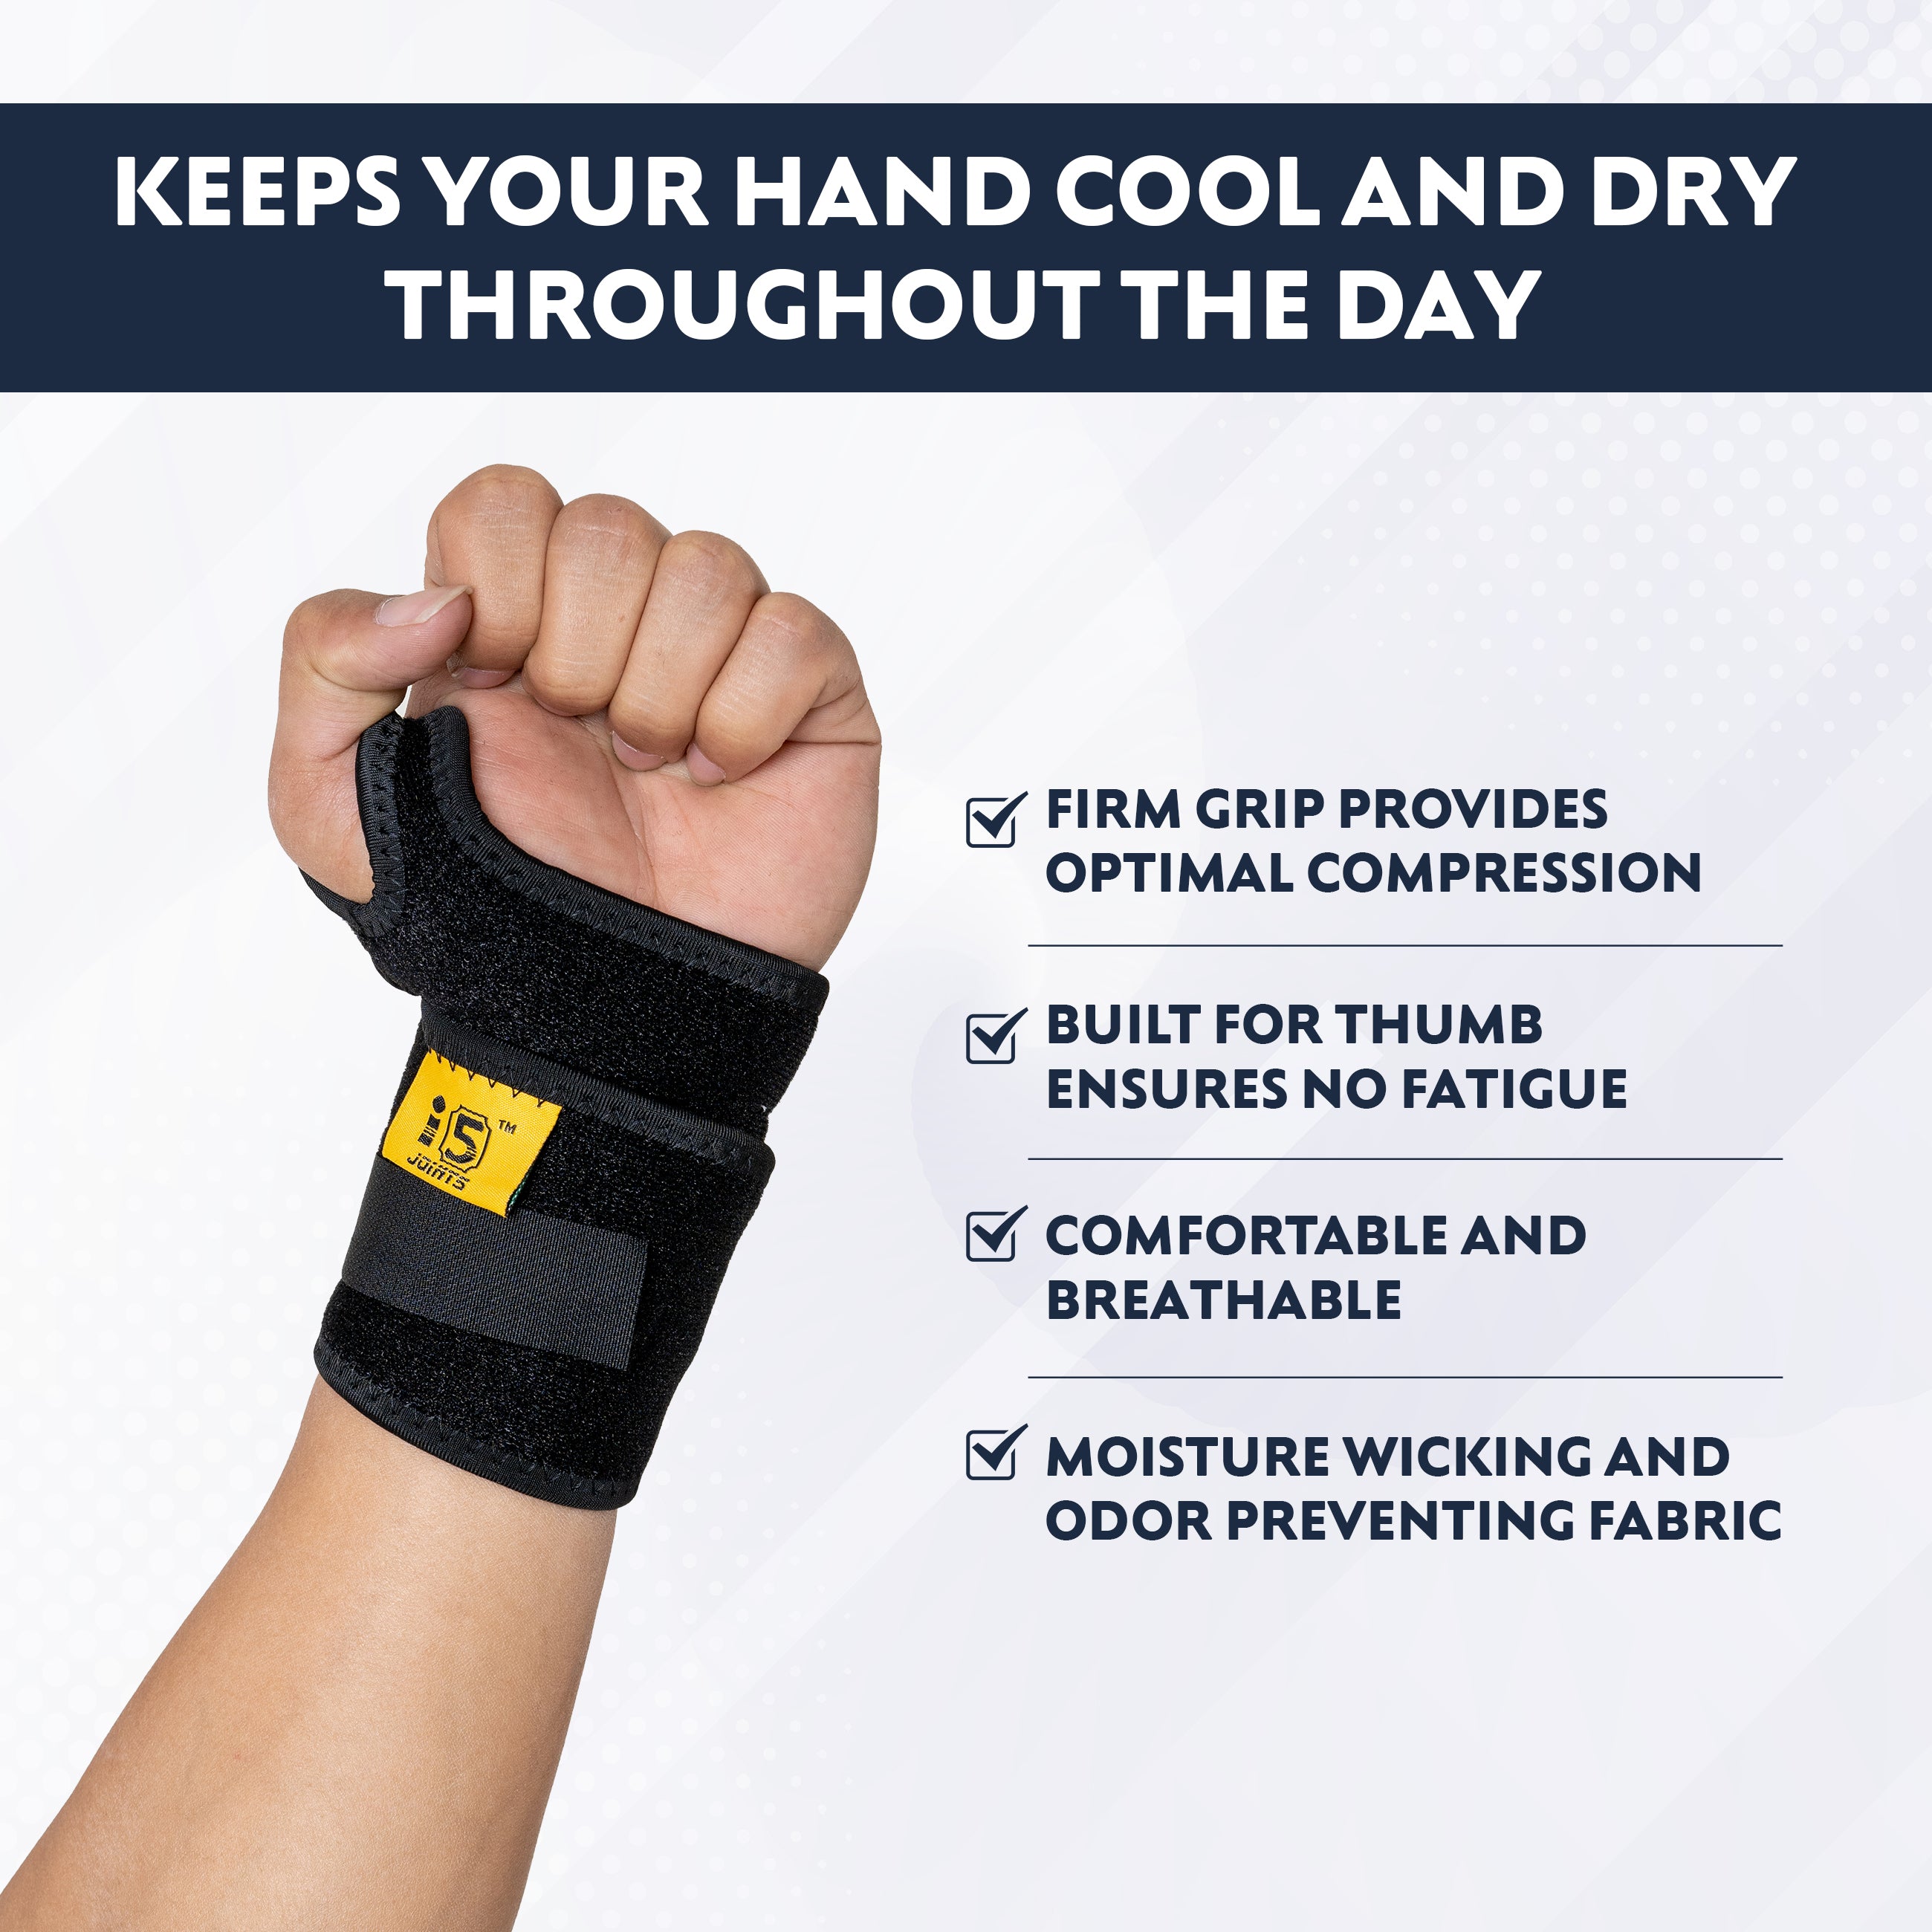 I5Joints– Magnetic Wrist Support( I5Joints Wrist Support for Men & Women | Wrist Band Supporter for Long Lasting|Strap with Thumb Comfortable Fit| Brace for Workout, Gym, Badminton | Sprain, Strain, Preventive Care, Overuse Care)